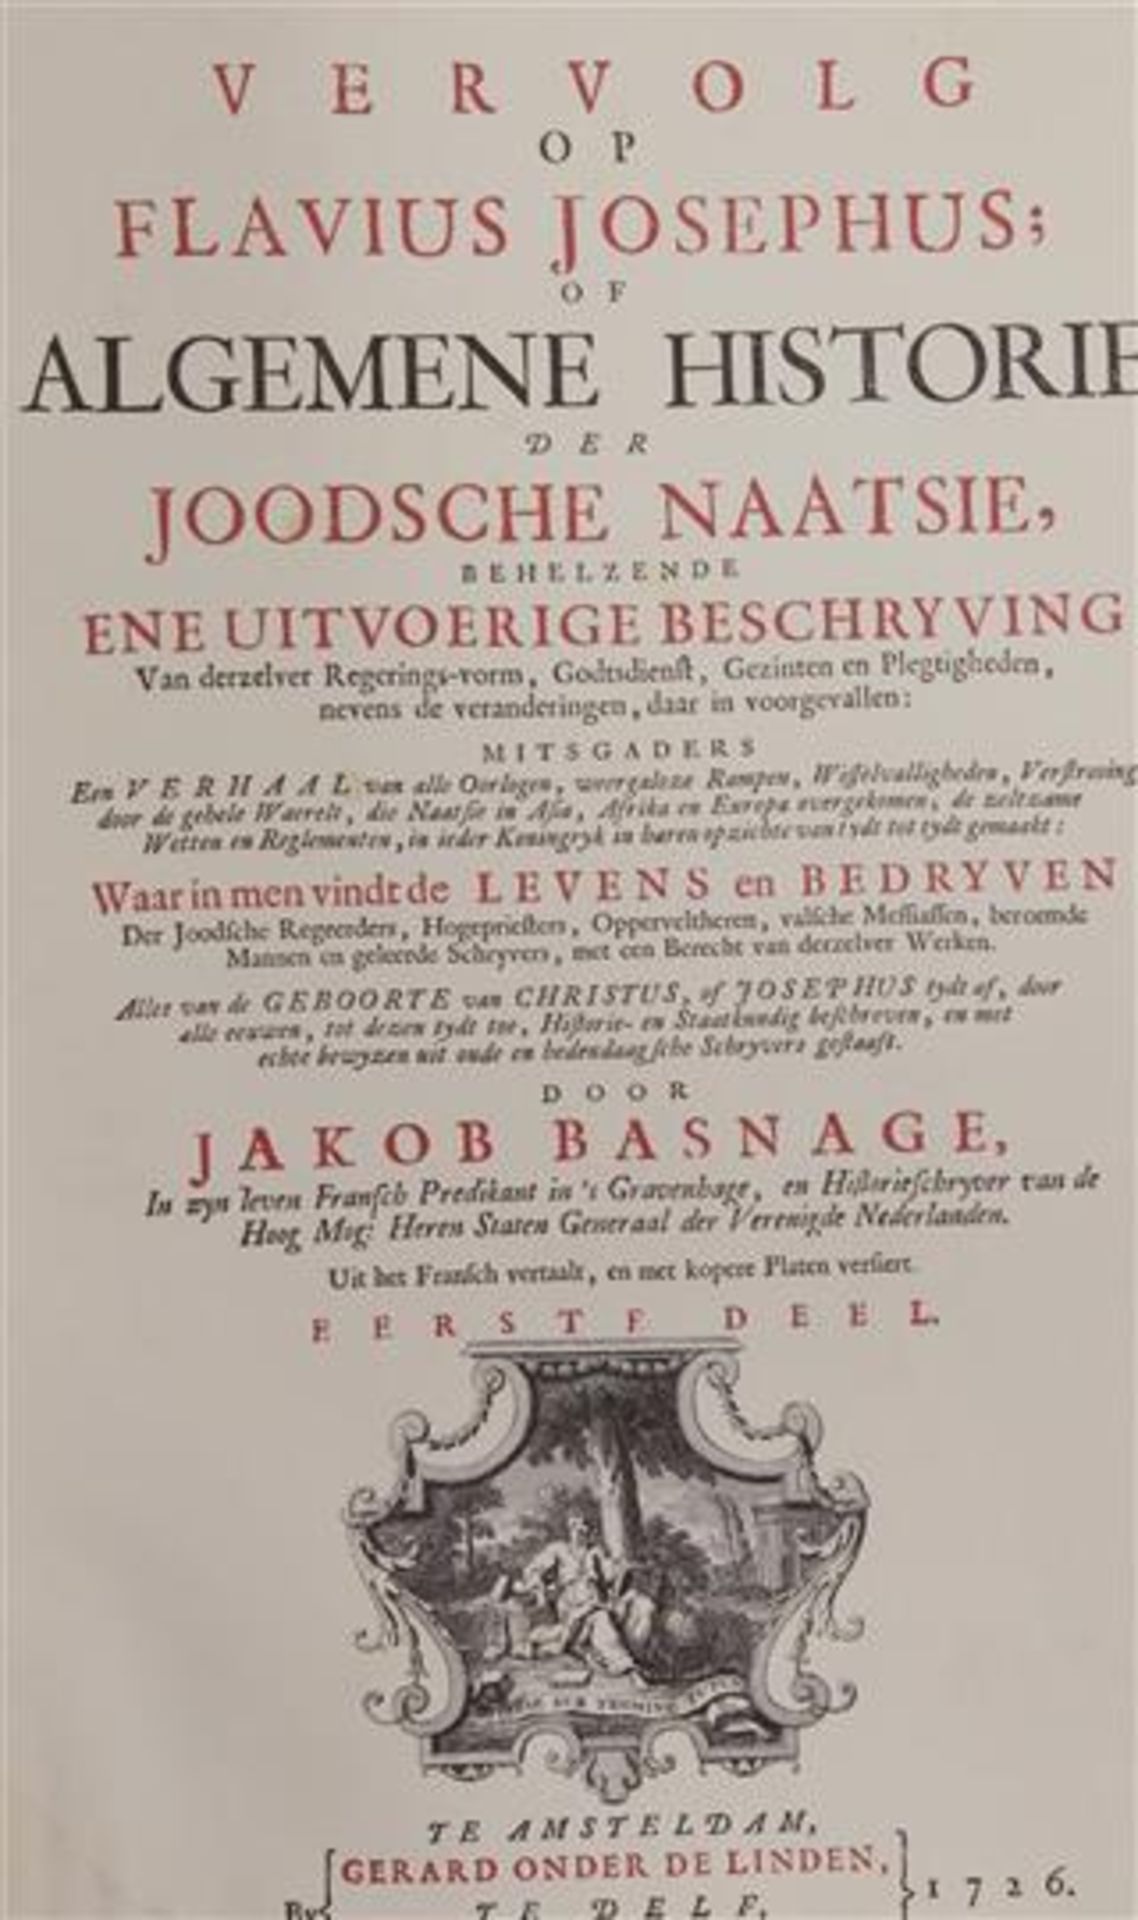 1988 reprint of the book "Sequel to Flavius Josephus by Jakob Basnage & nbsp; from 1726" - Image 3 of 3